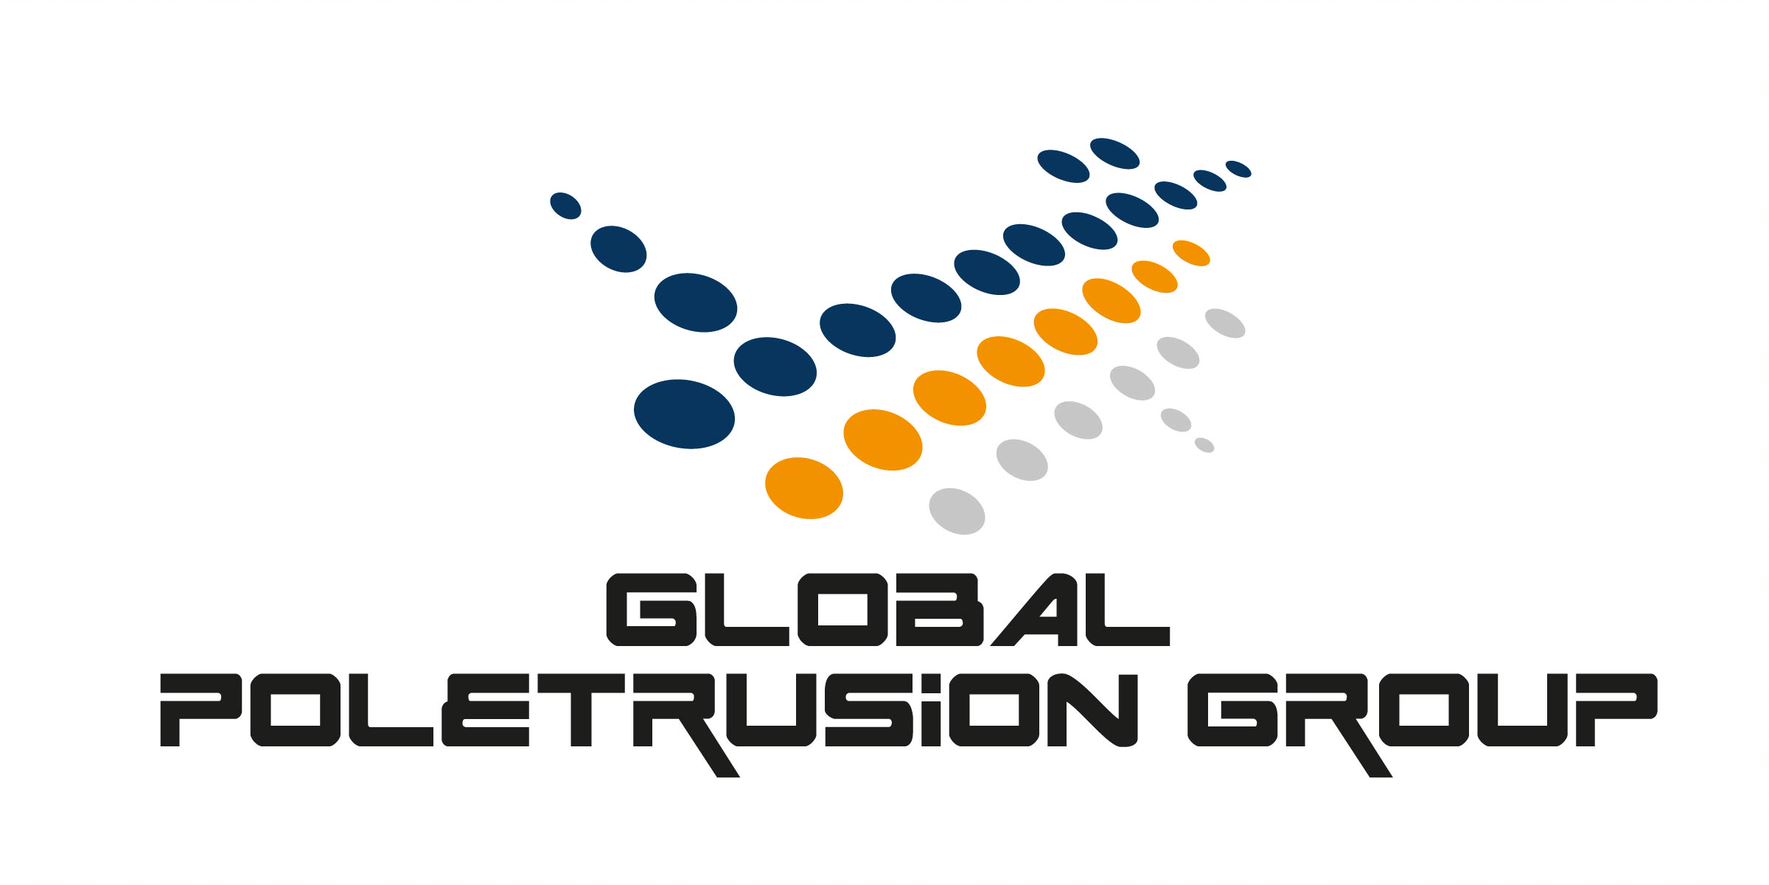 Global PoleTrusion Group Corp., Tuesday, January 15, 2019, Press release picture